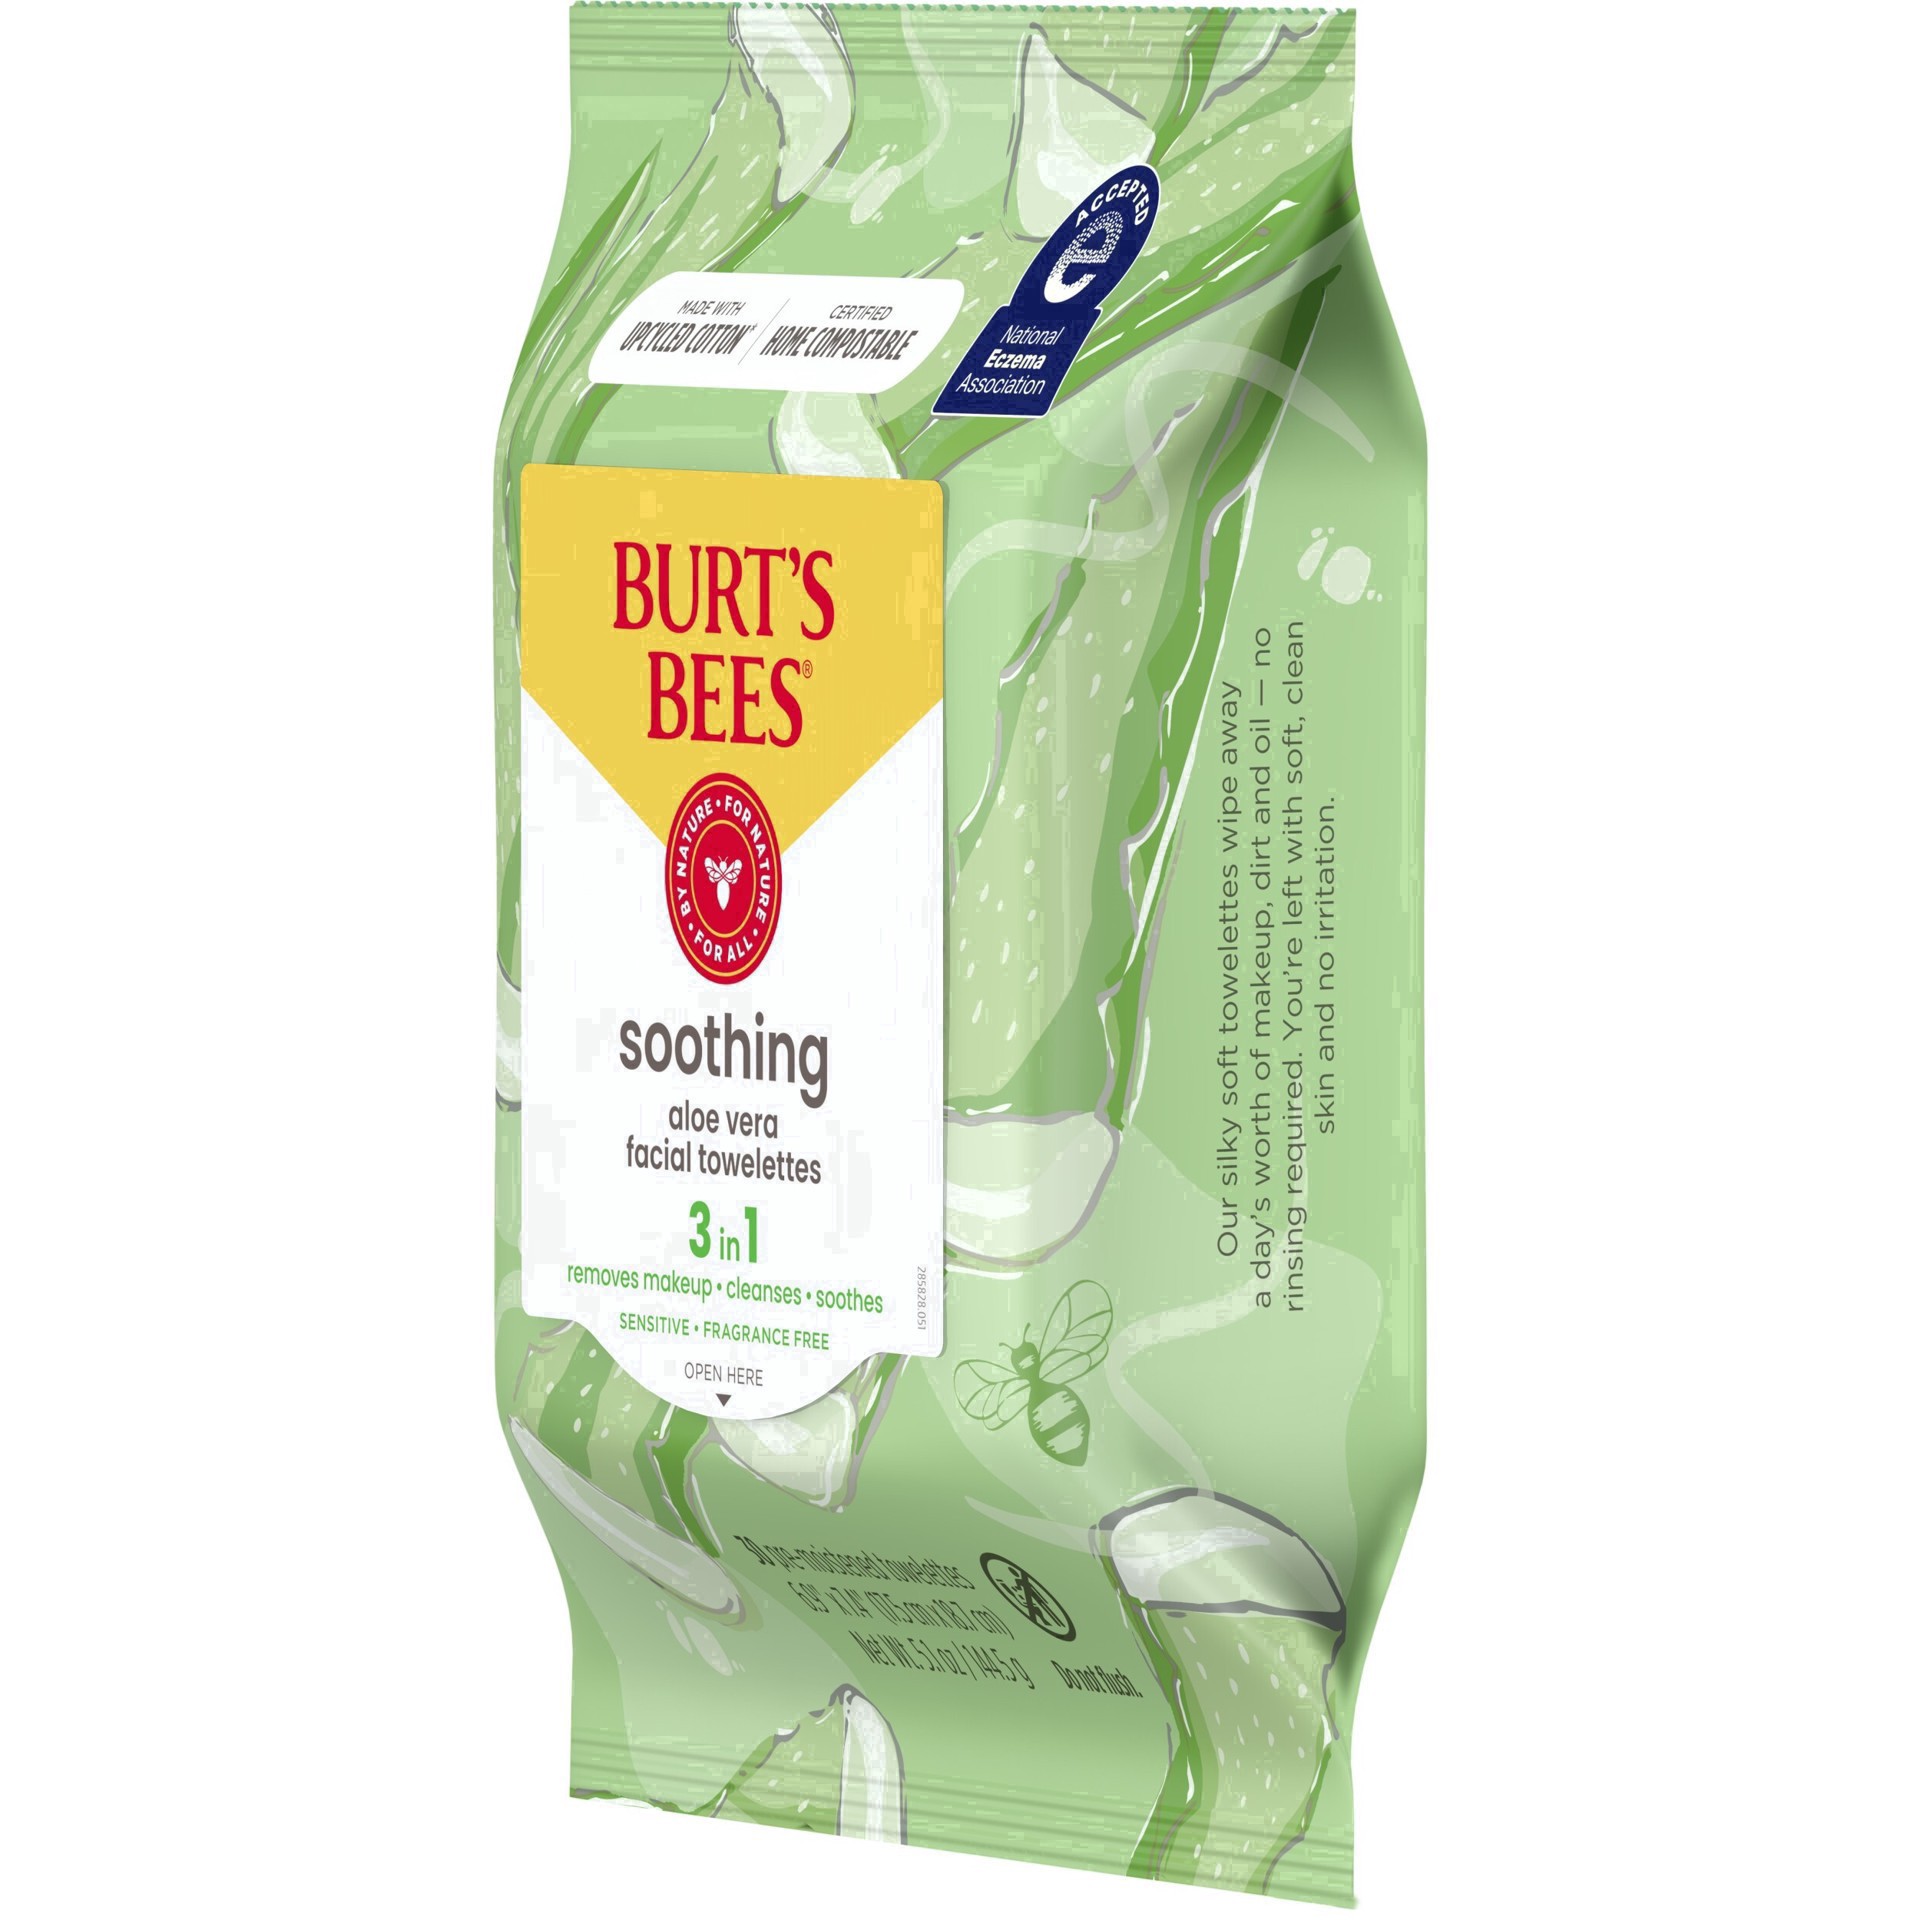 slide 95 of 137, Burt's Bees Soothing Facial Cleanser and Makeup Remover Towelettes with Aloe Vera for Sensitive Skin, Made with Upcycled Cotton, 30 Count, 30 ct